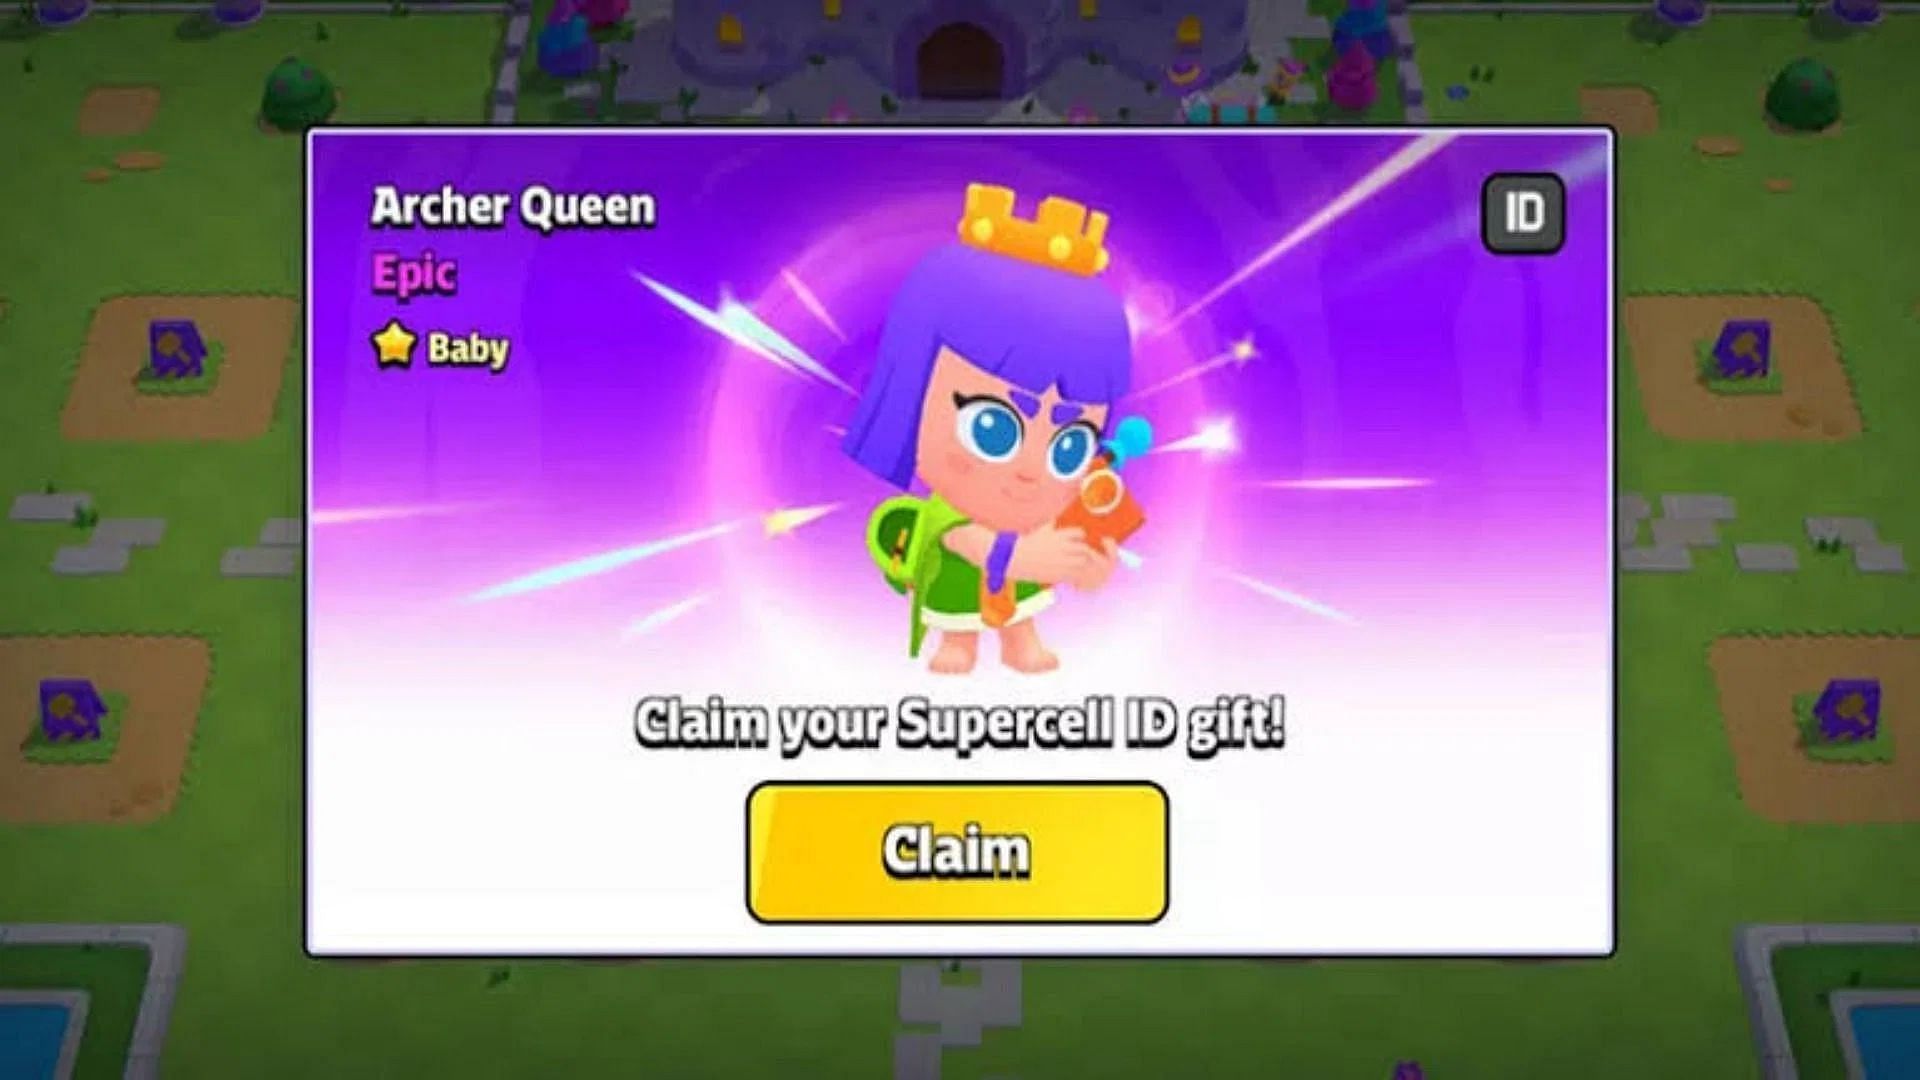 Archer Queen is available for free in Squad Busters (Image via Supercell)